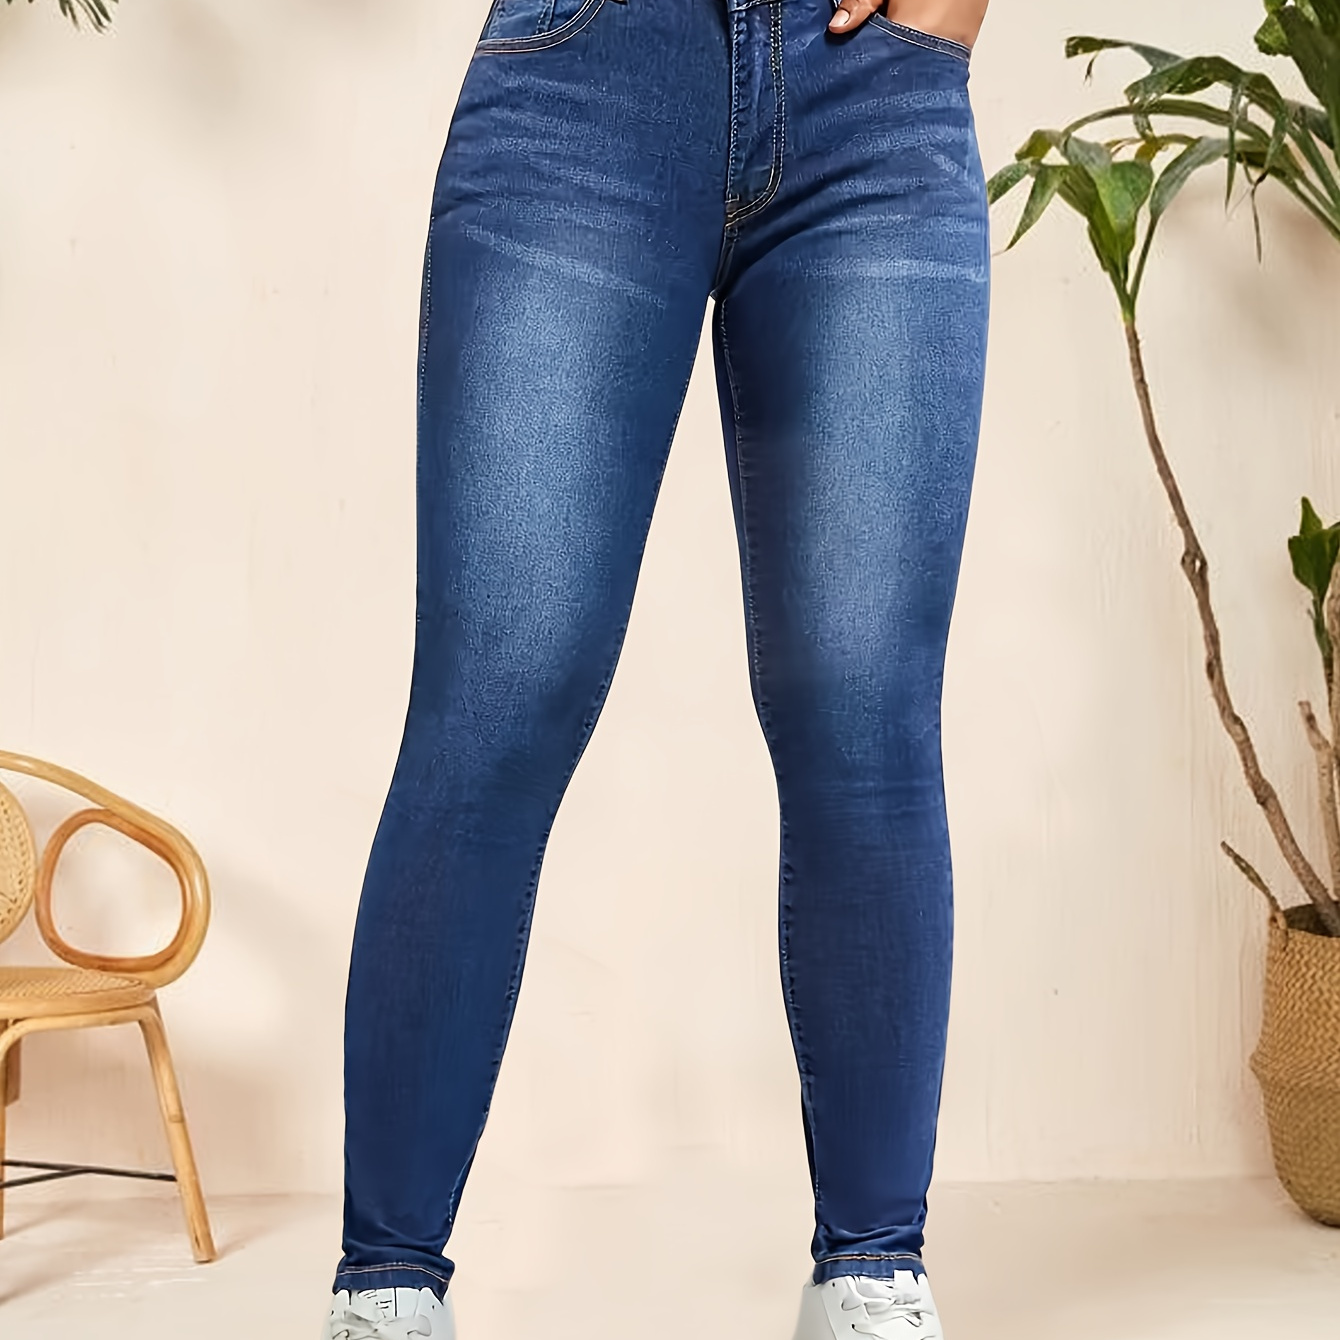 

High Rise High Waist Water Ripple Embossed Crotch High Stretchy Long Skinny Jeans, Women's Denim Jeans, Women's Clothing